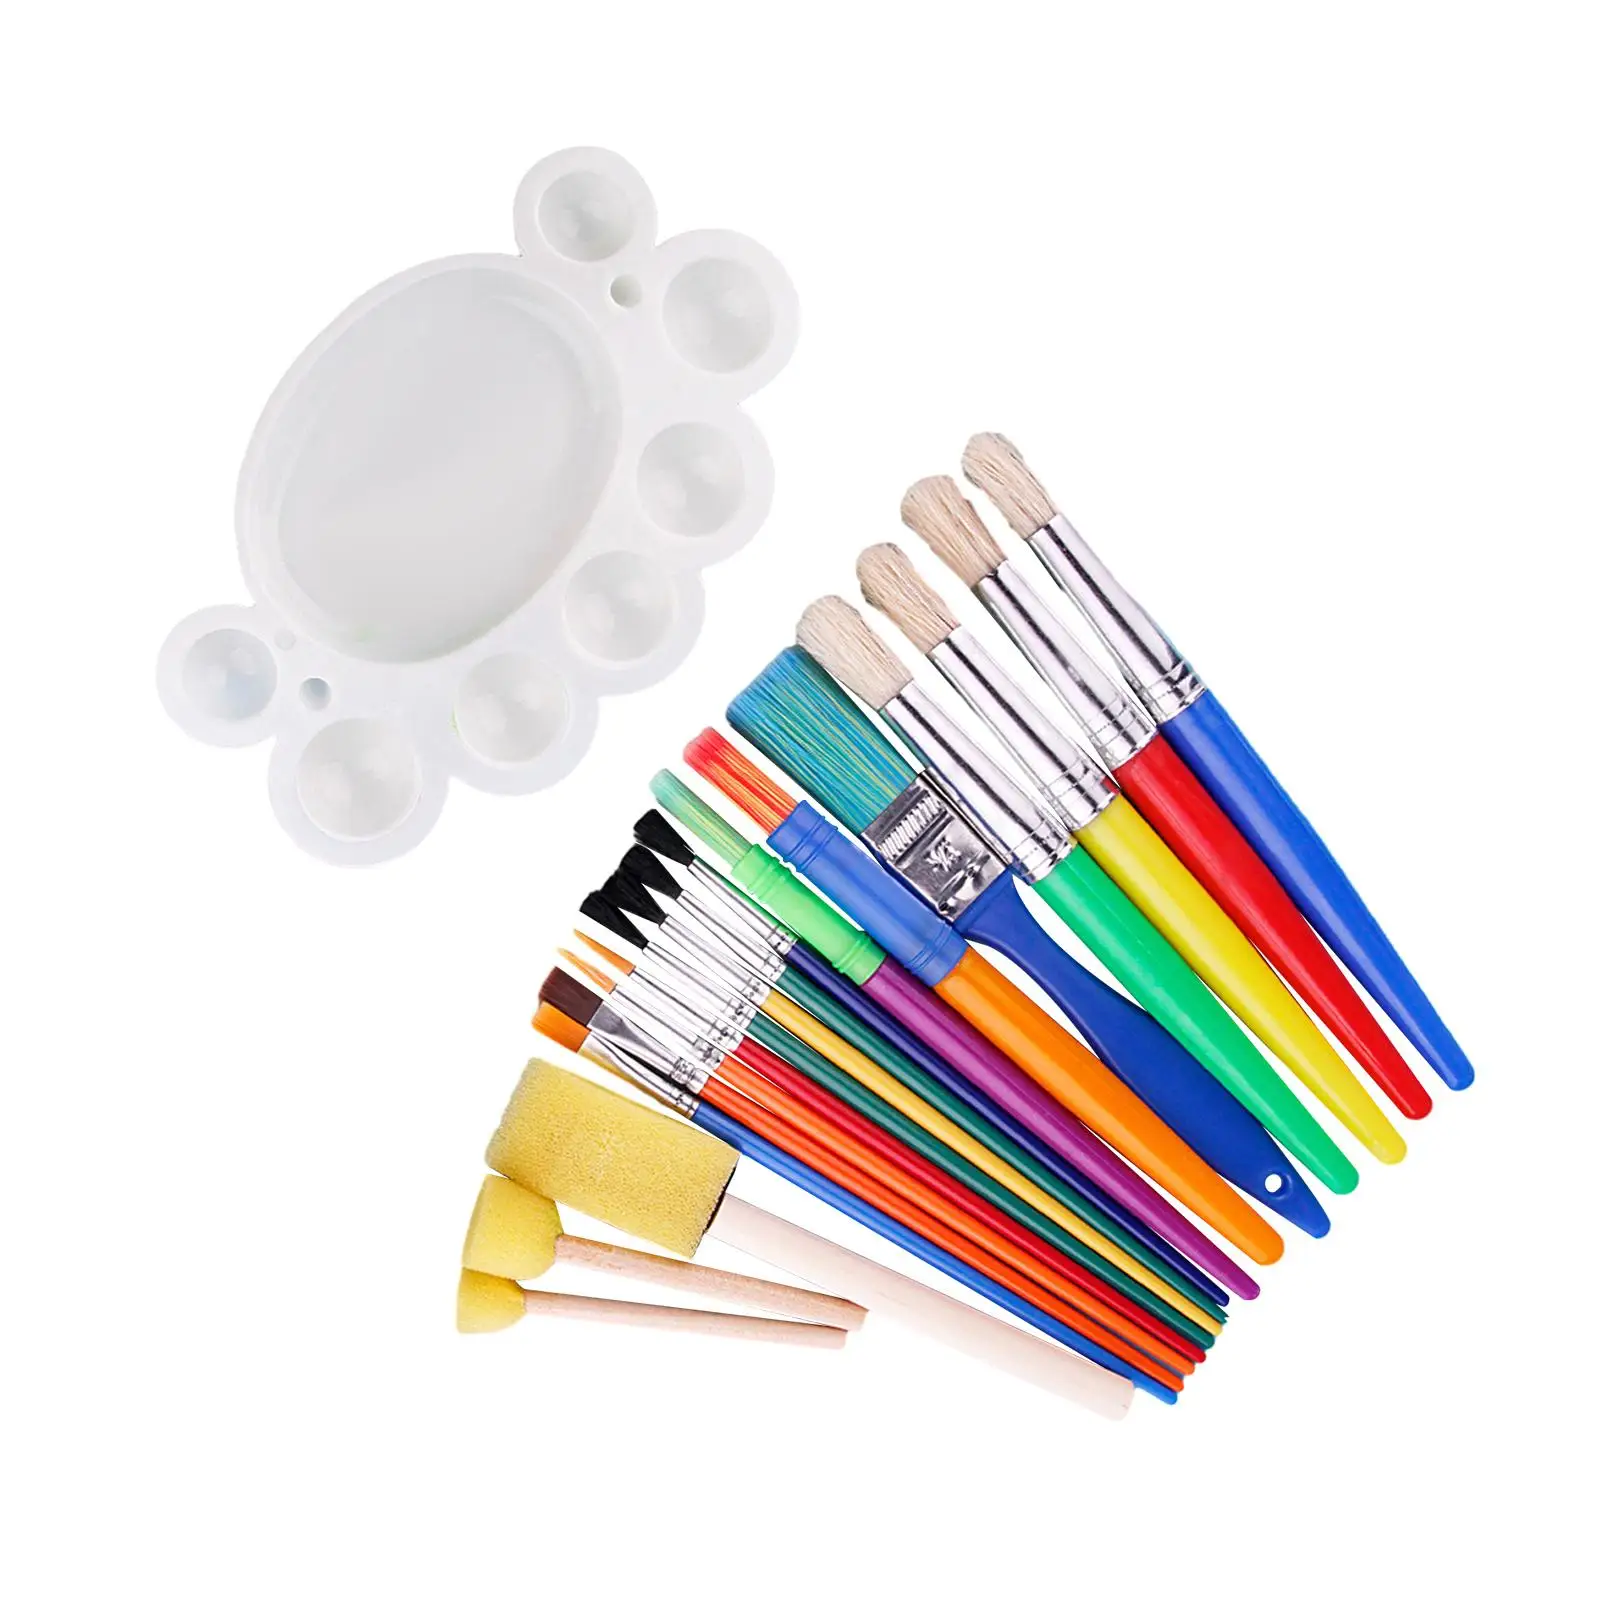 19x Paint Brush Set Watercolor Painting Boys and Girls Children Adults Beginner Lightweight Paintbrushes Painting Brushes